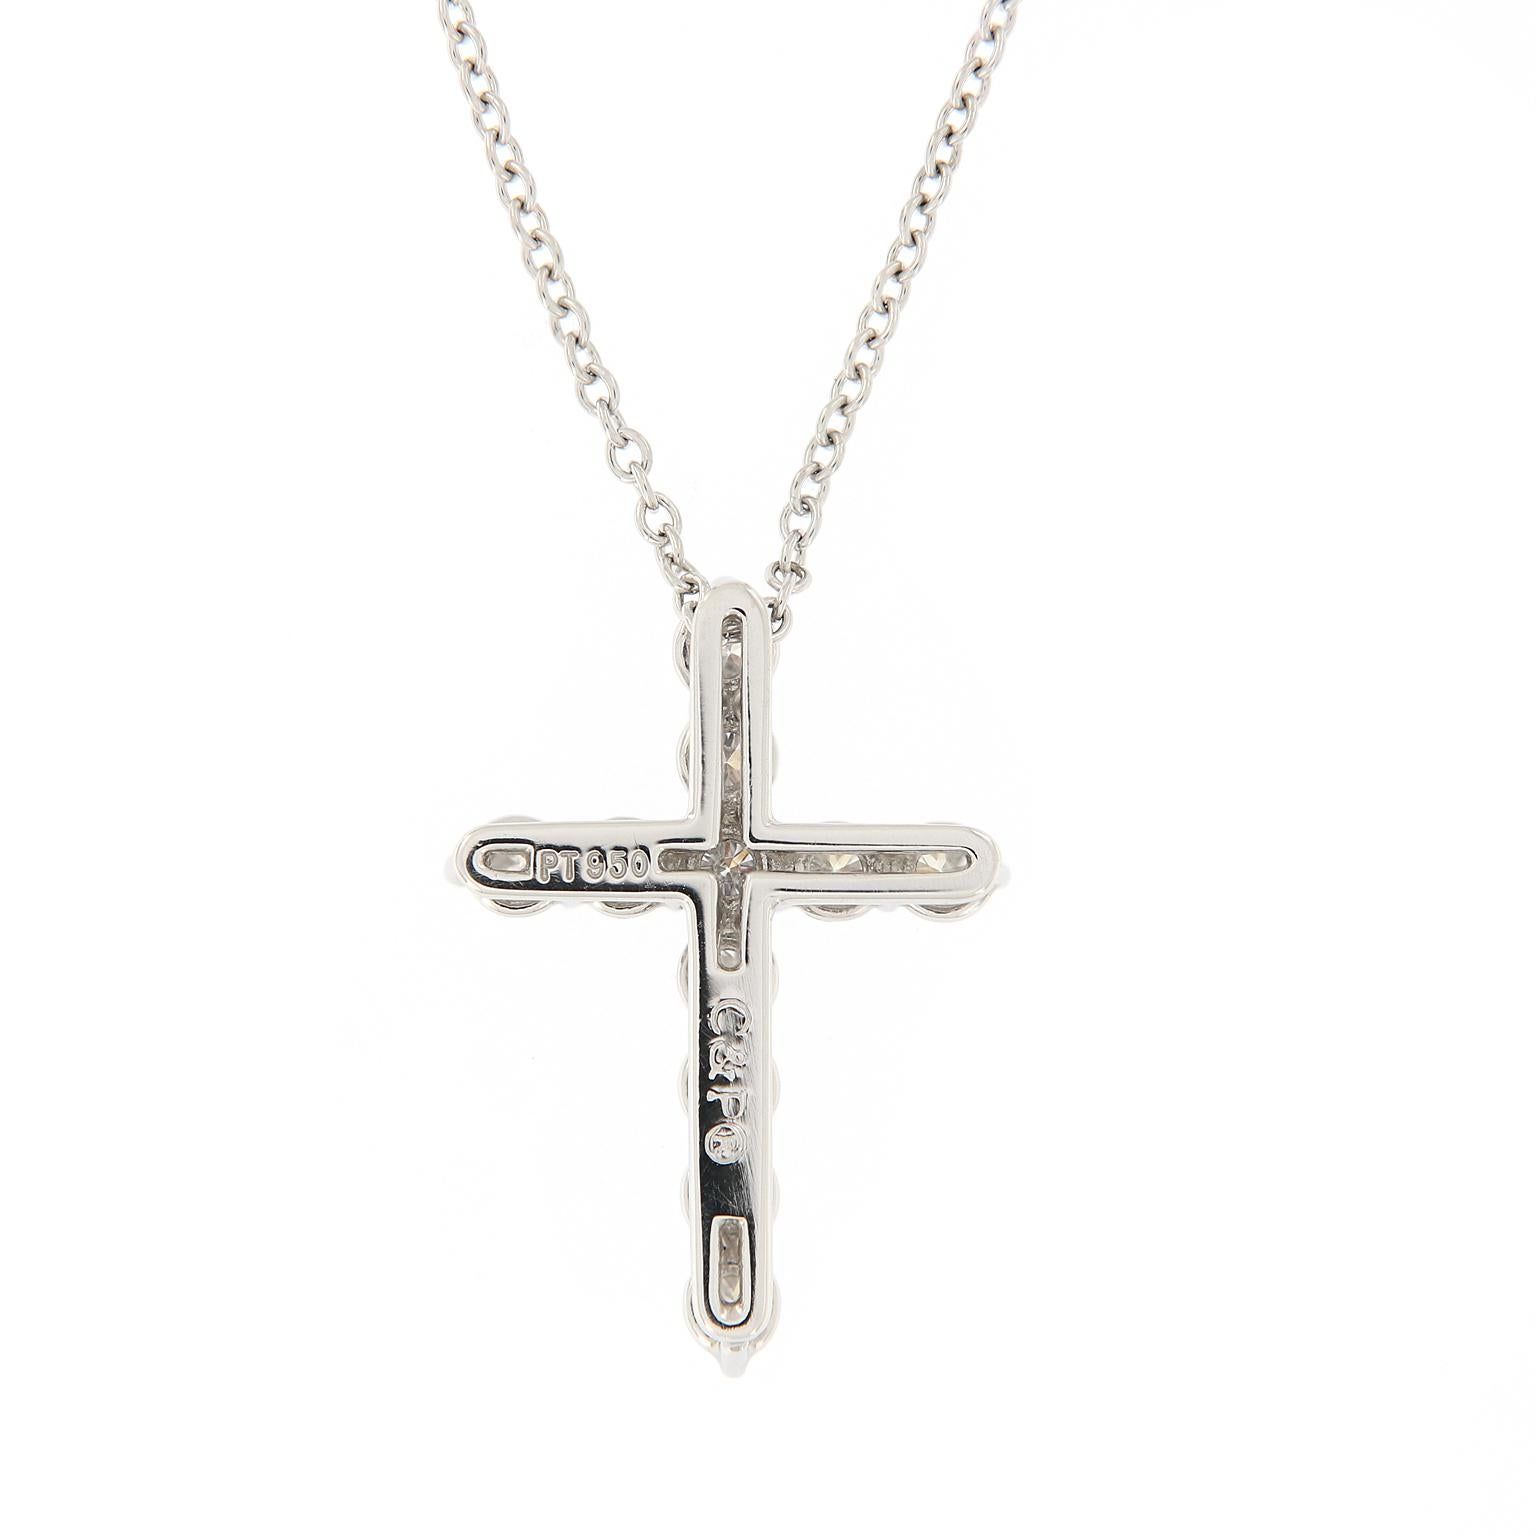 This diamond cross pendant, handcrafted in platinum is a classic piece of jewelry for everyday or special moments. Weighs 3.8 grams. Pendant 18mm long x 13mm wide

RBC Diamonds 0.45 cttw, VS G-H